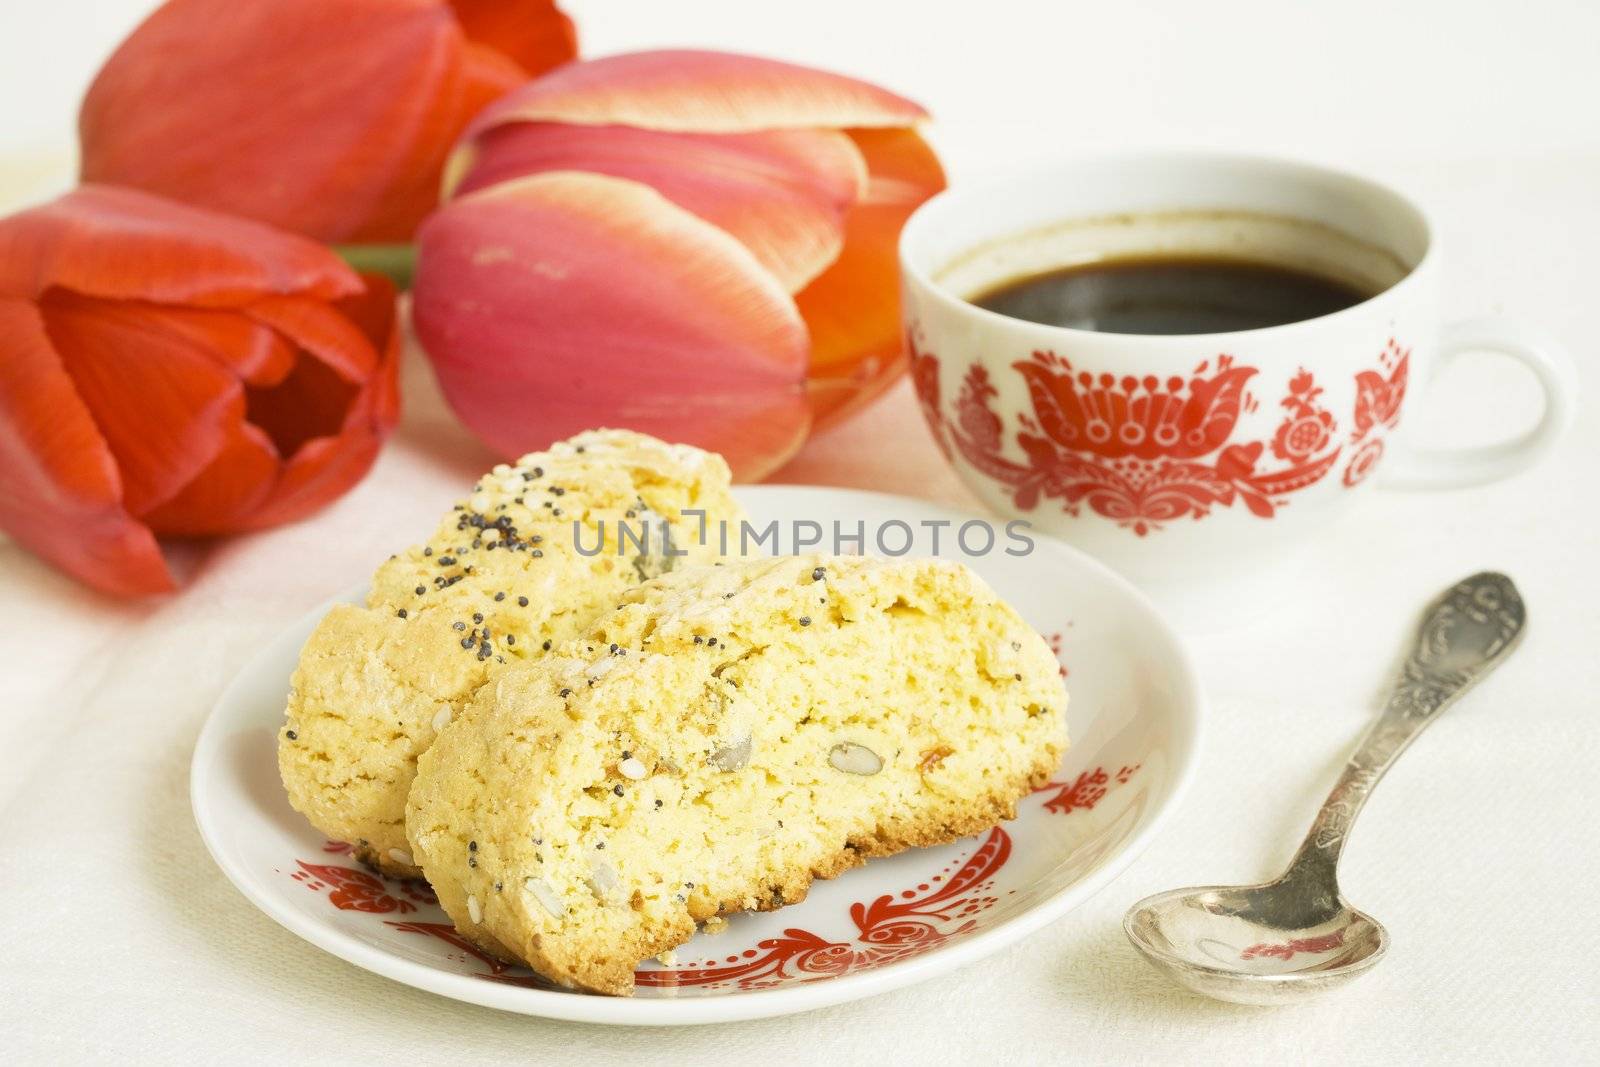 Corn biscotti with coffee cup and red tulips on the table